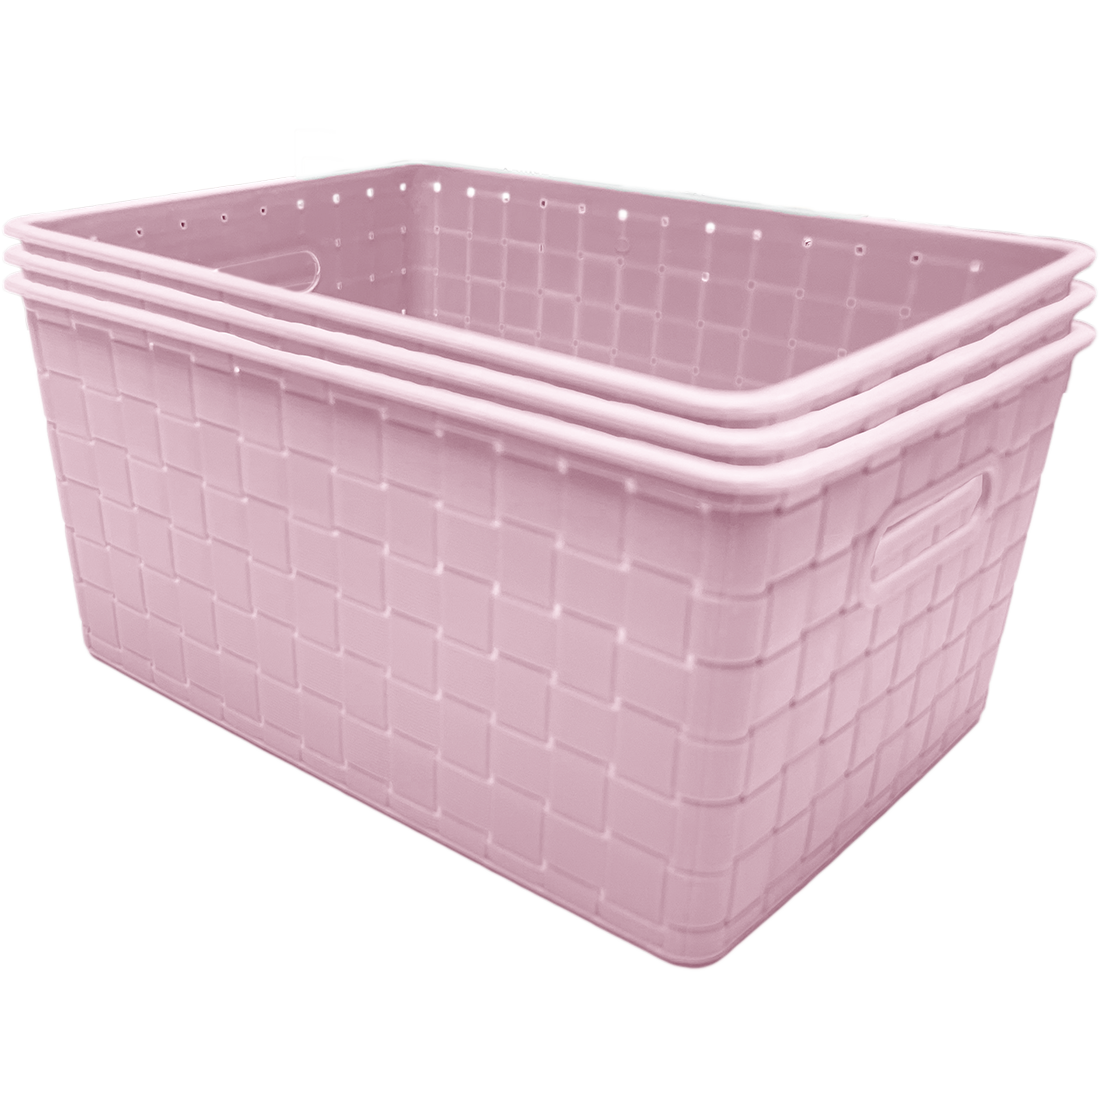 3 Pack Woven Plastic Storage Basket - Pink Checkered